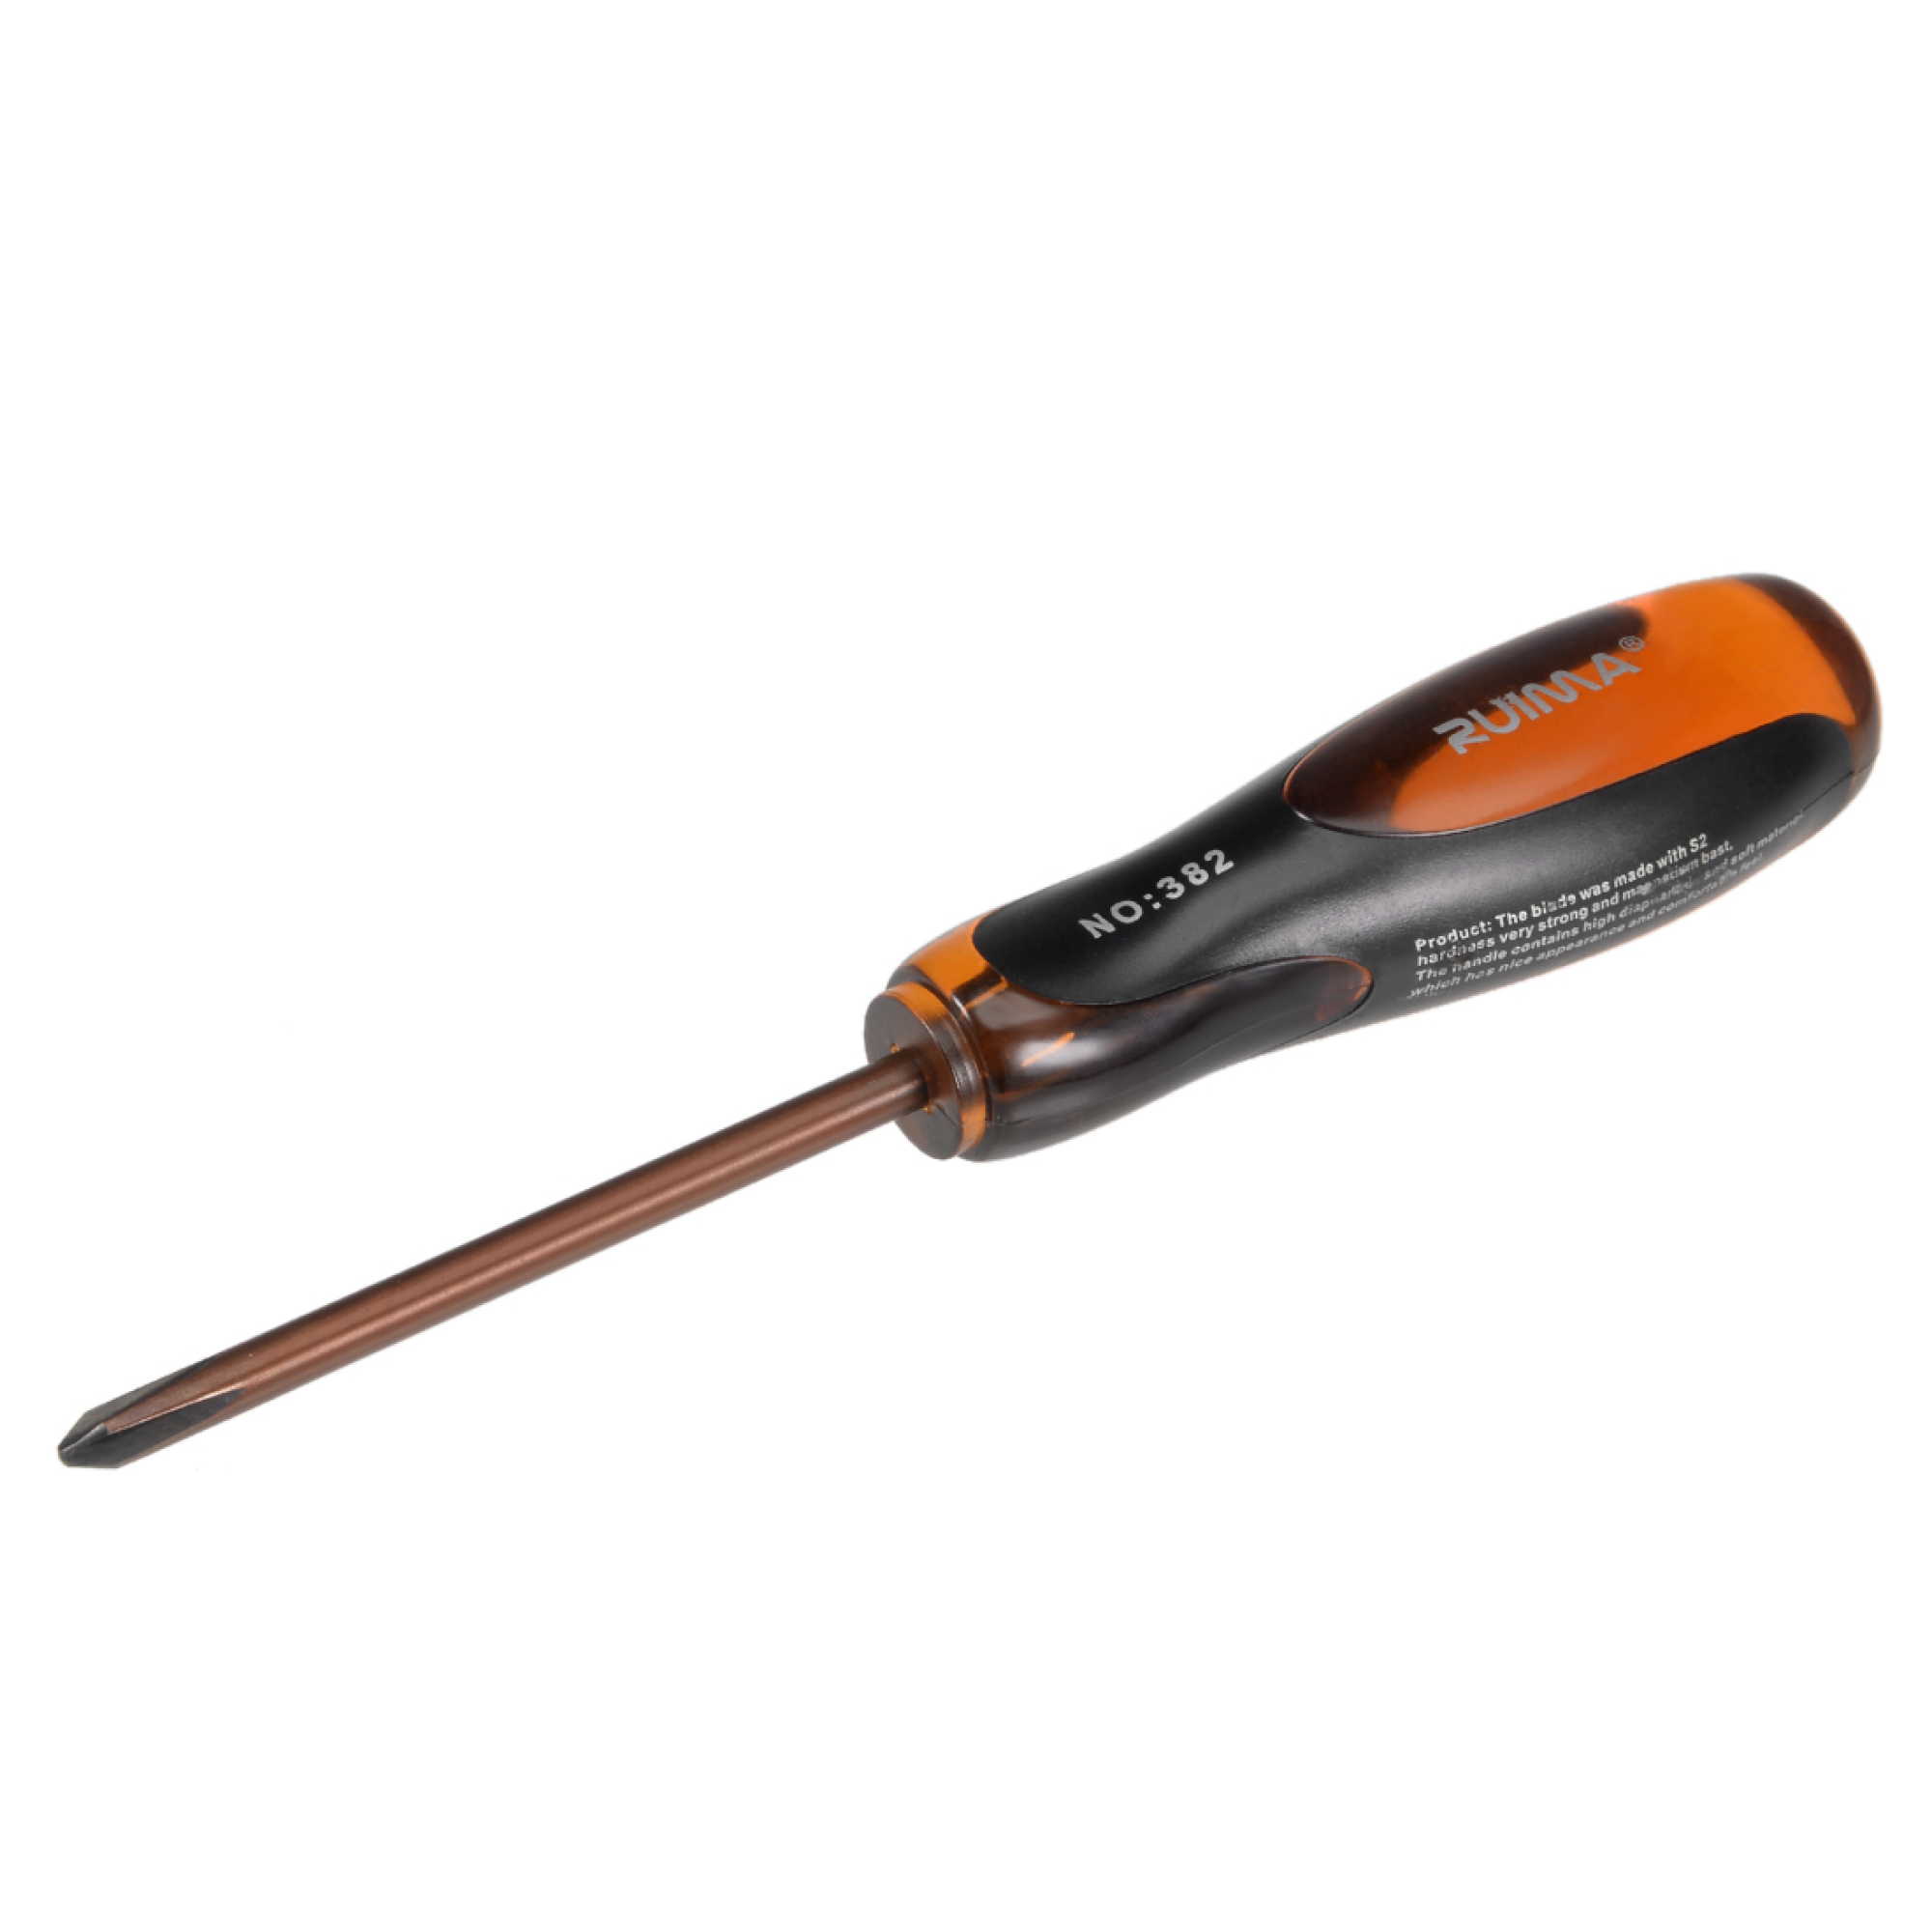 PH1 Phillips Magnetic Screwdriver 3 Inch Round Shaft Grip